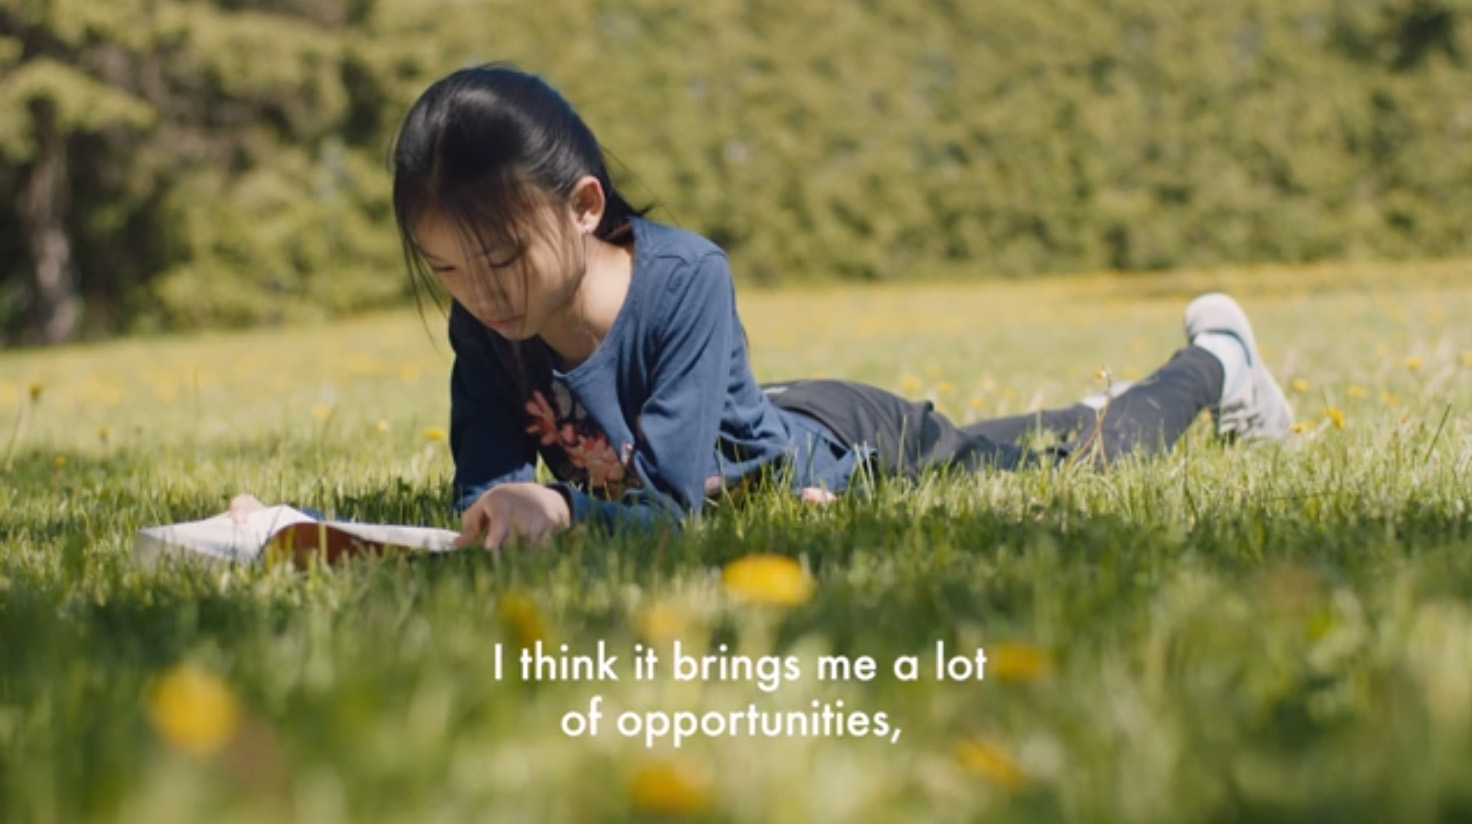 Kumon Releases 2018 Inspirational Student Videos and Encourages Students to Achieve their Dreams